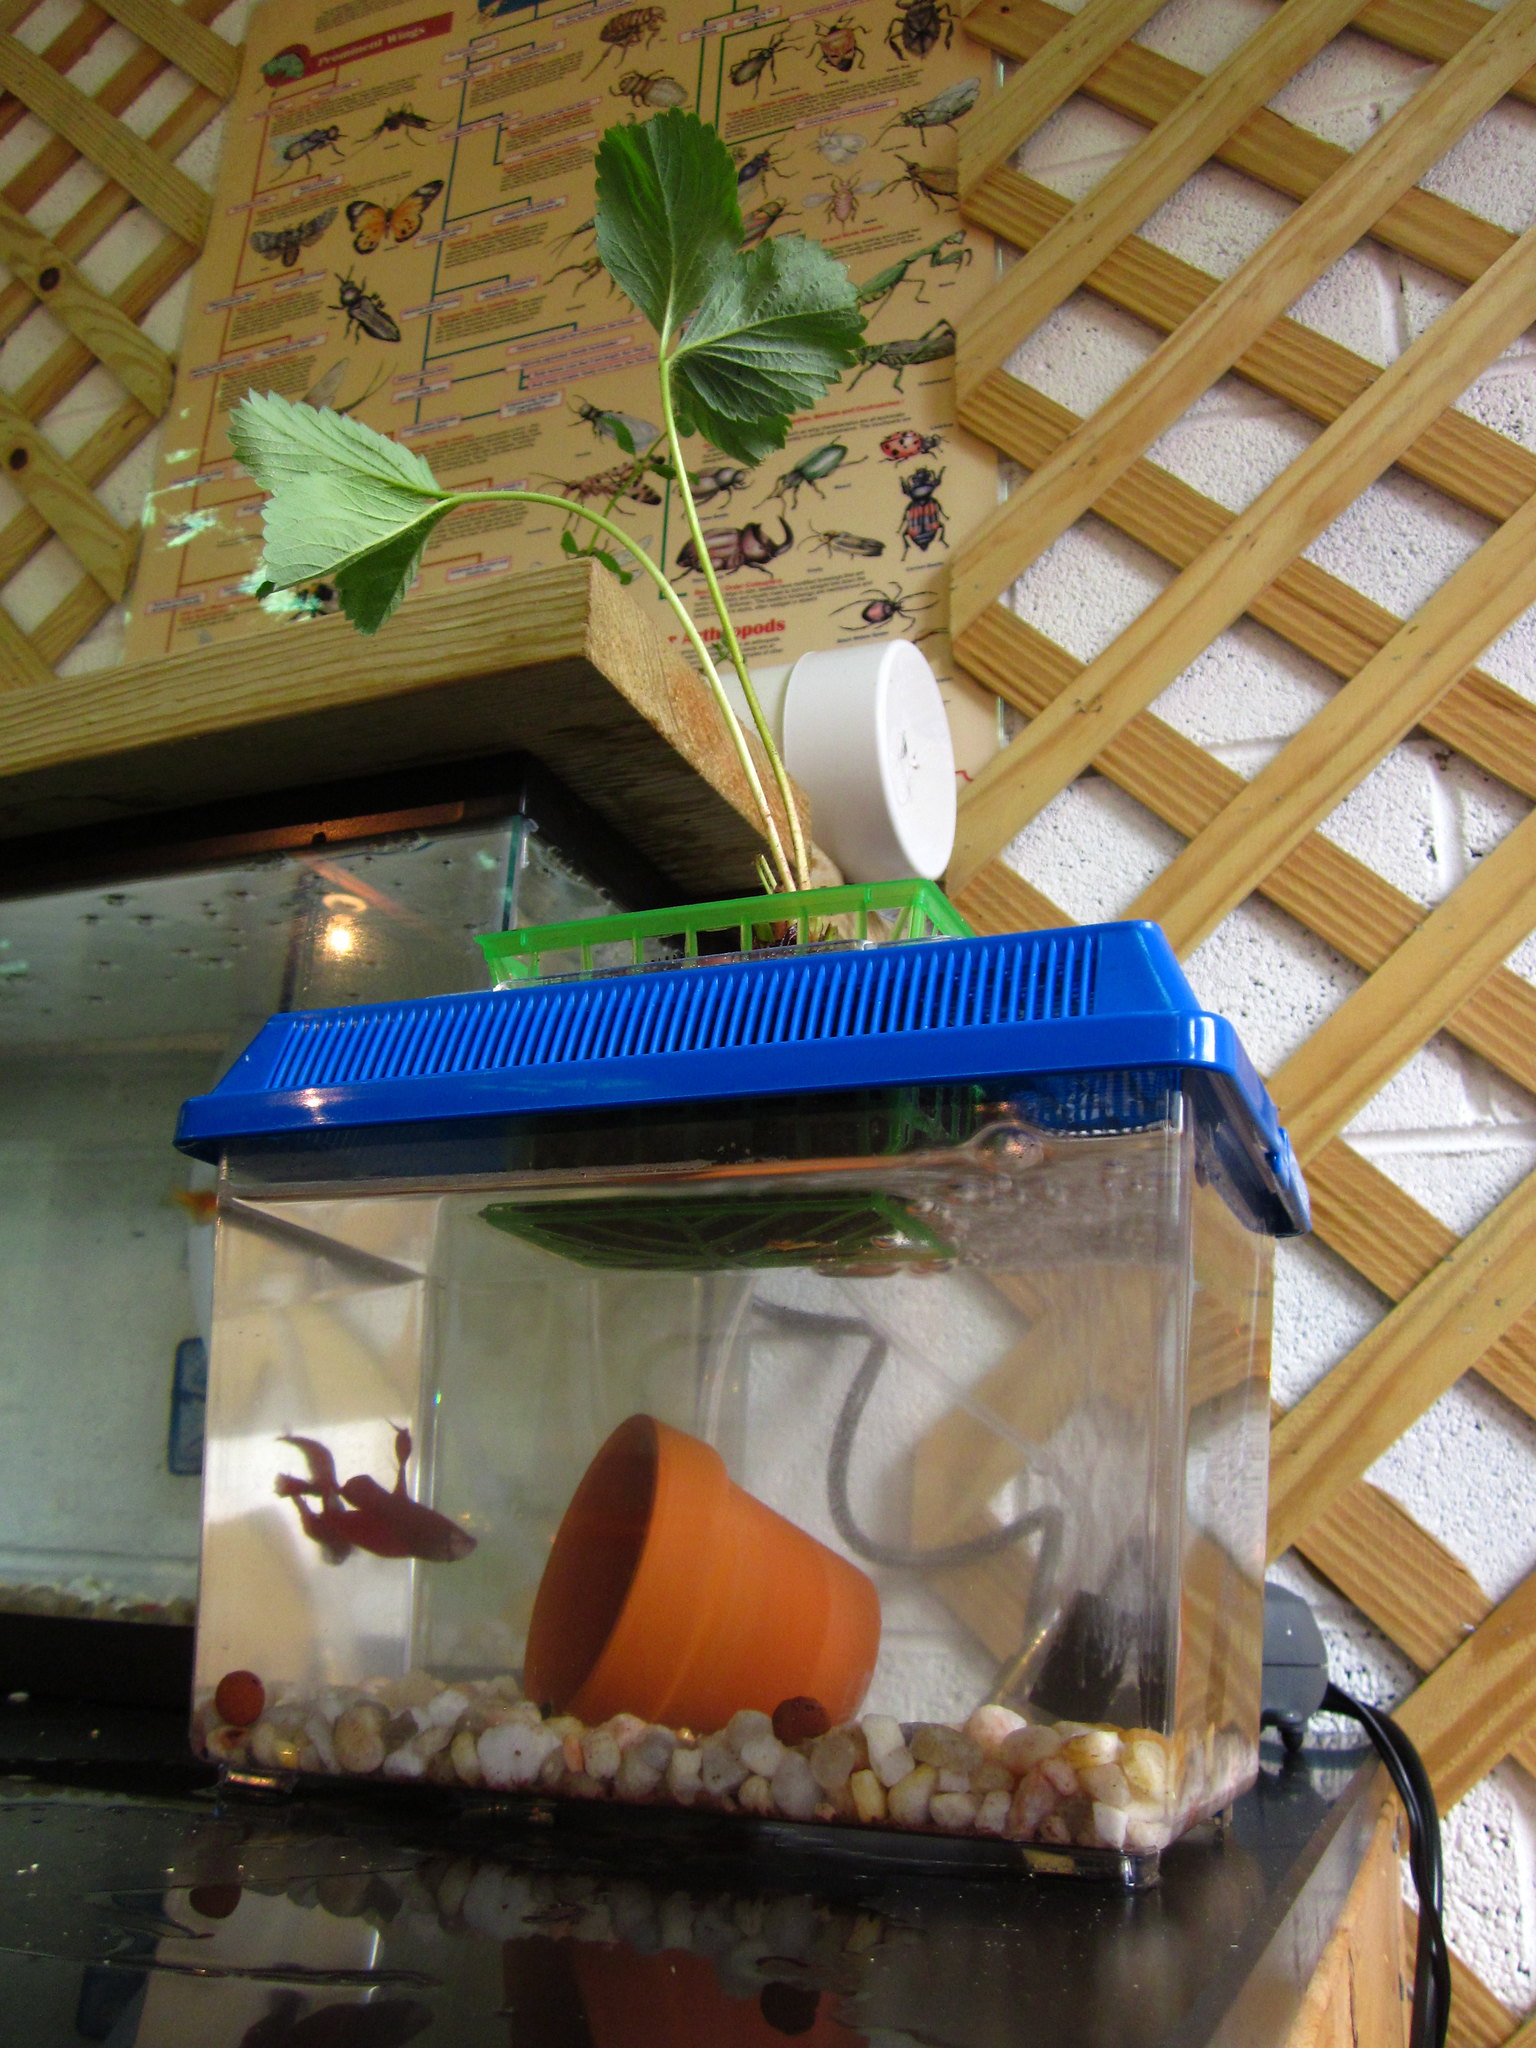 The Thrifty Gardener: Mini Aquaponics -- Small in Size and Expense